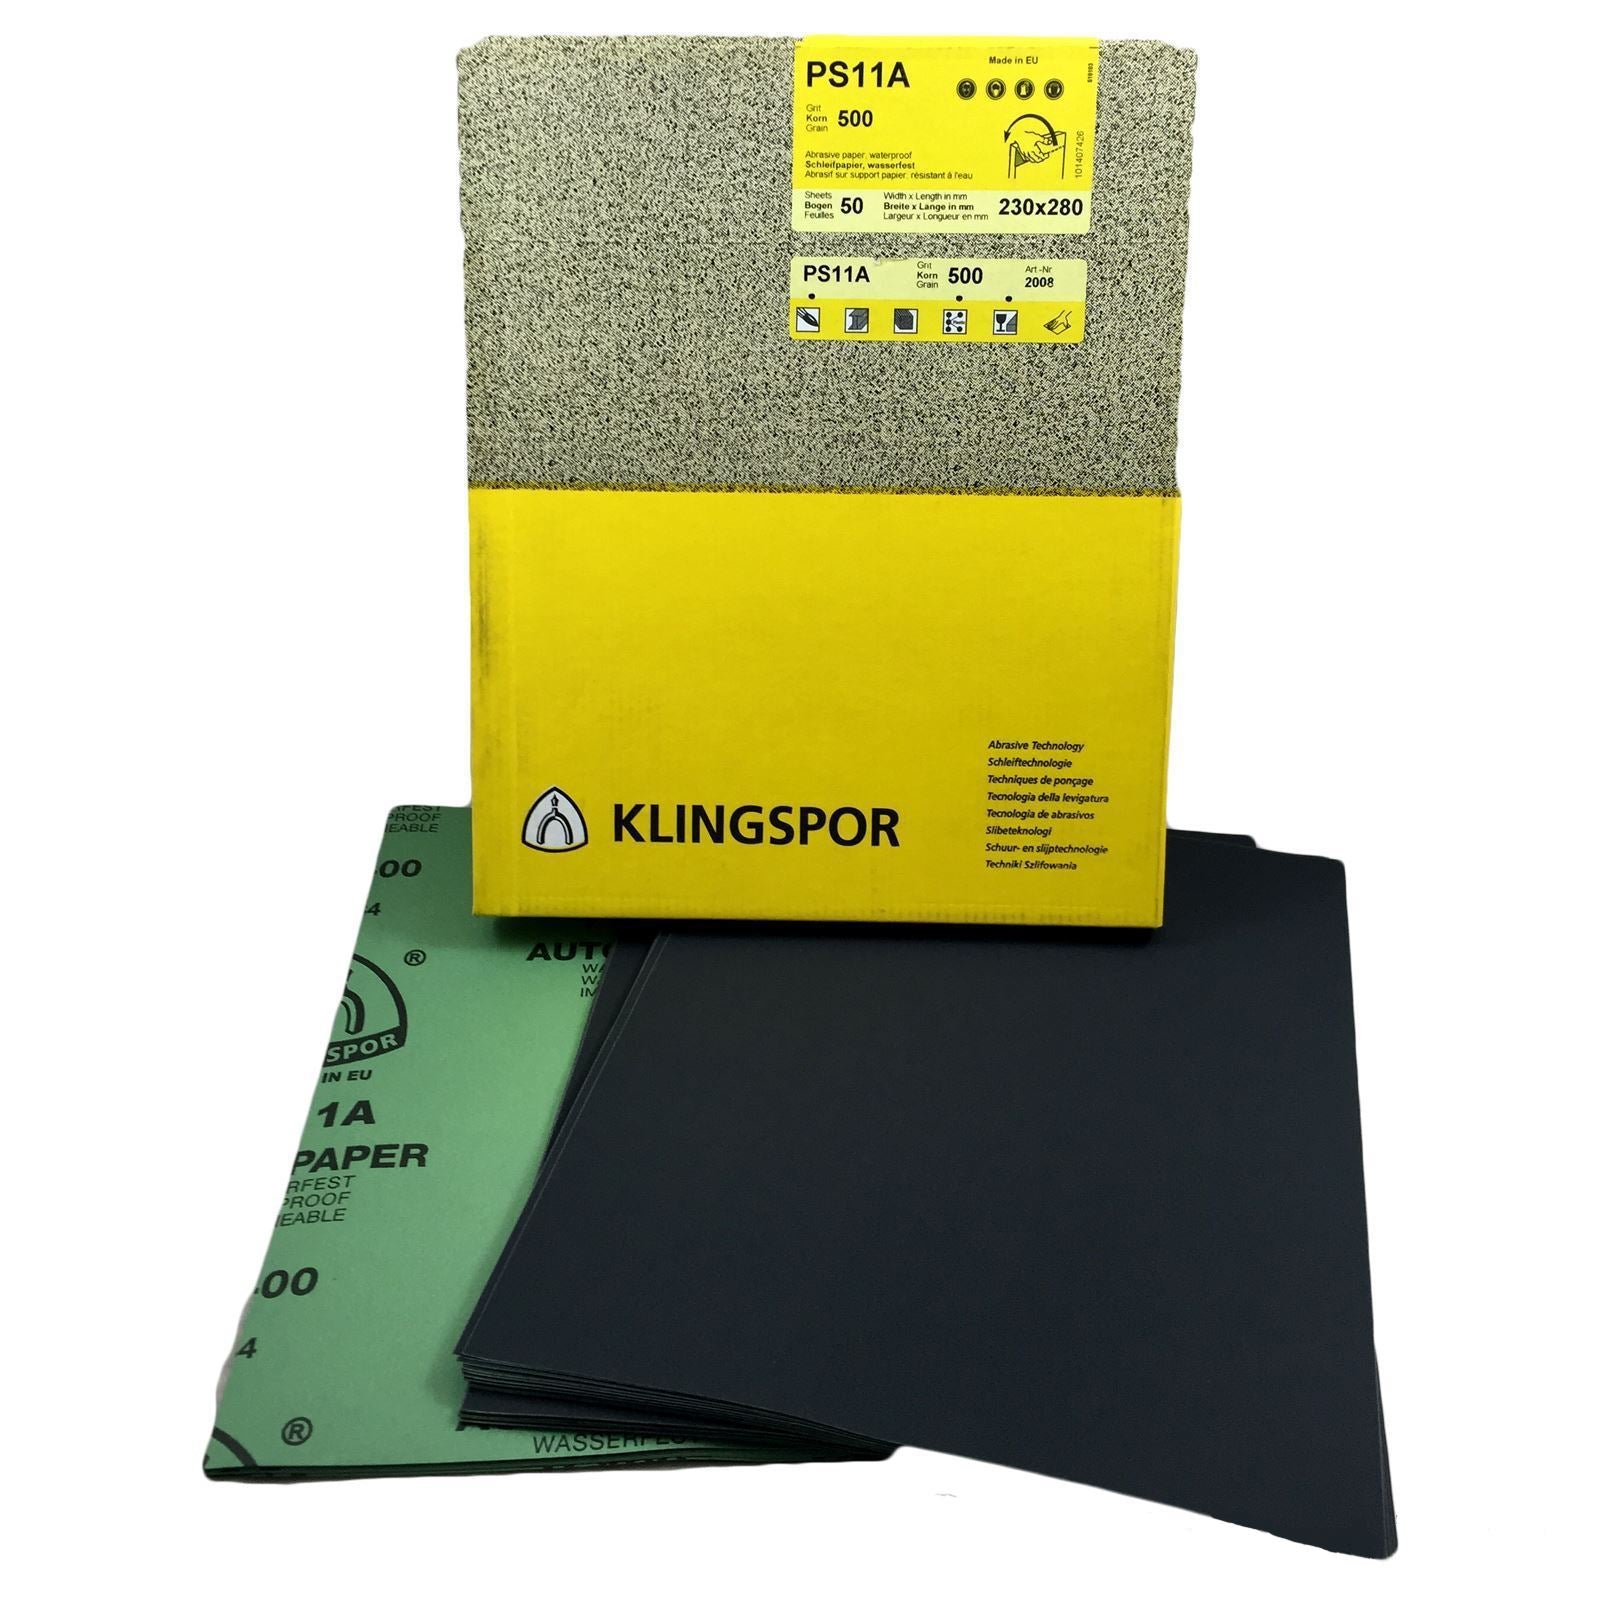 Klingspor Wet and Dry Sanding Sheets PS11A and PS11C